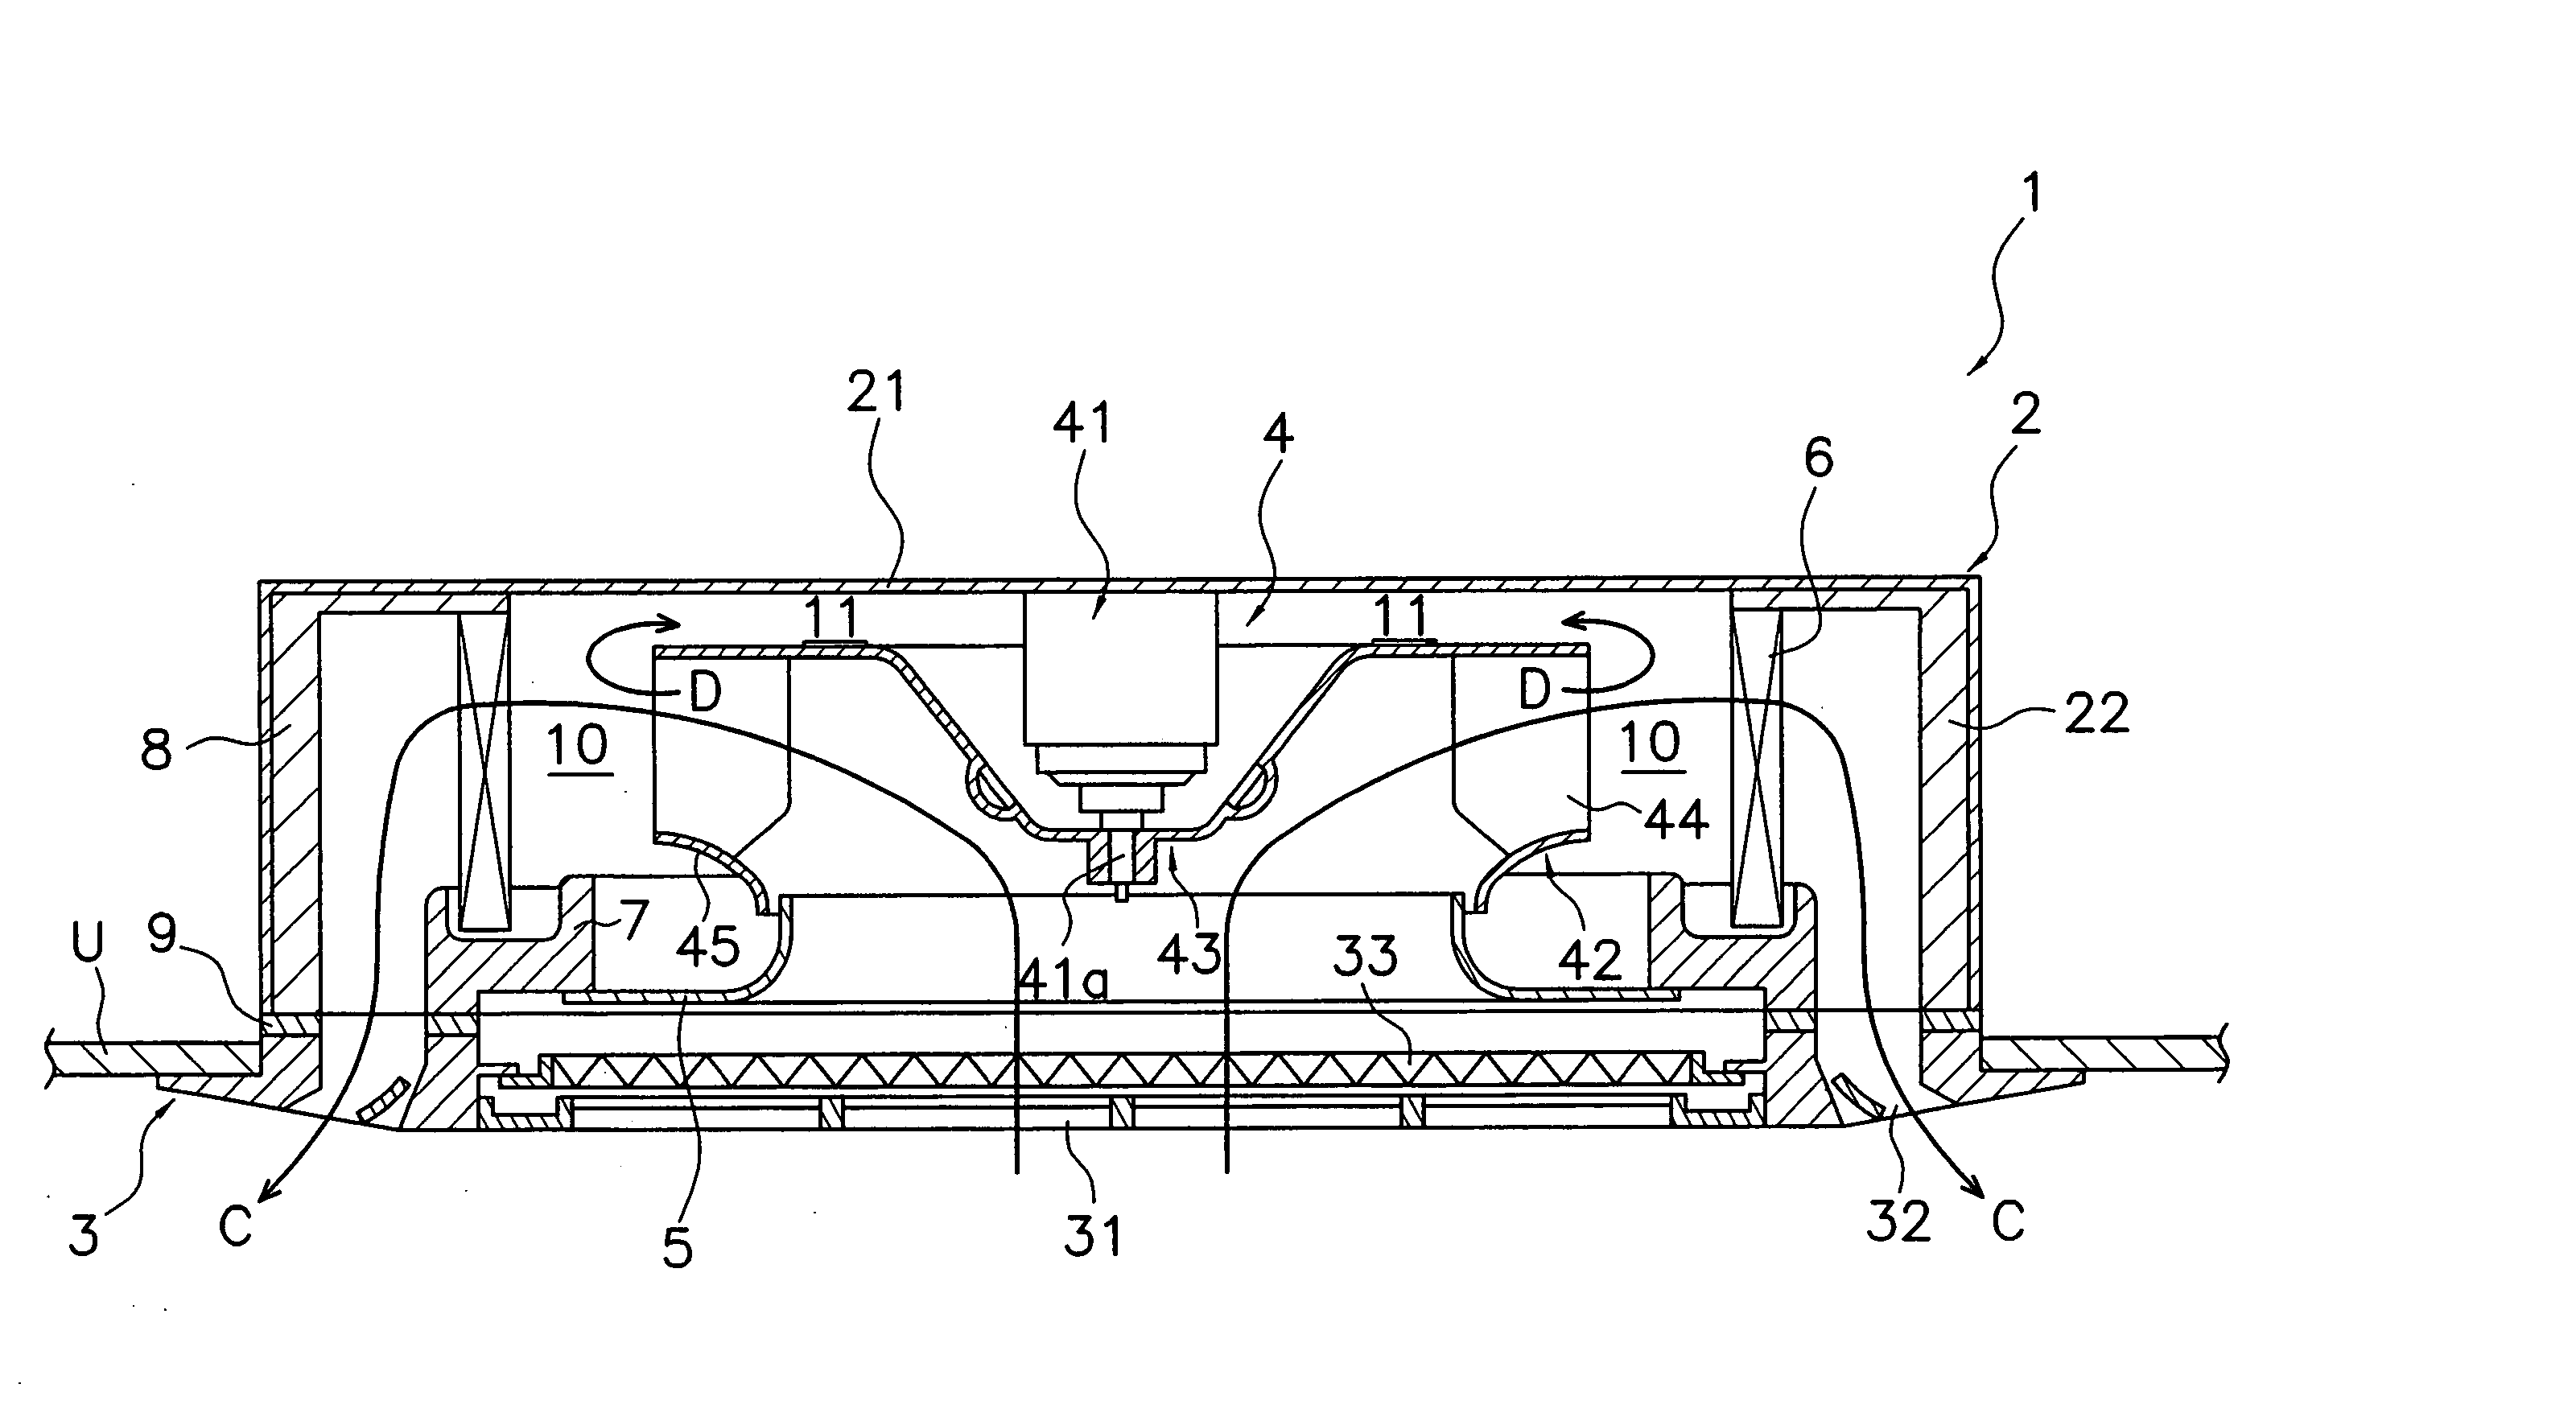 Centrifugal blower and air conditioner with the same